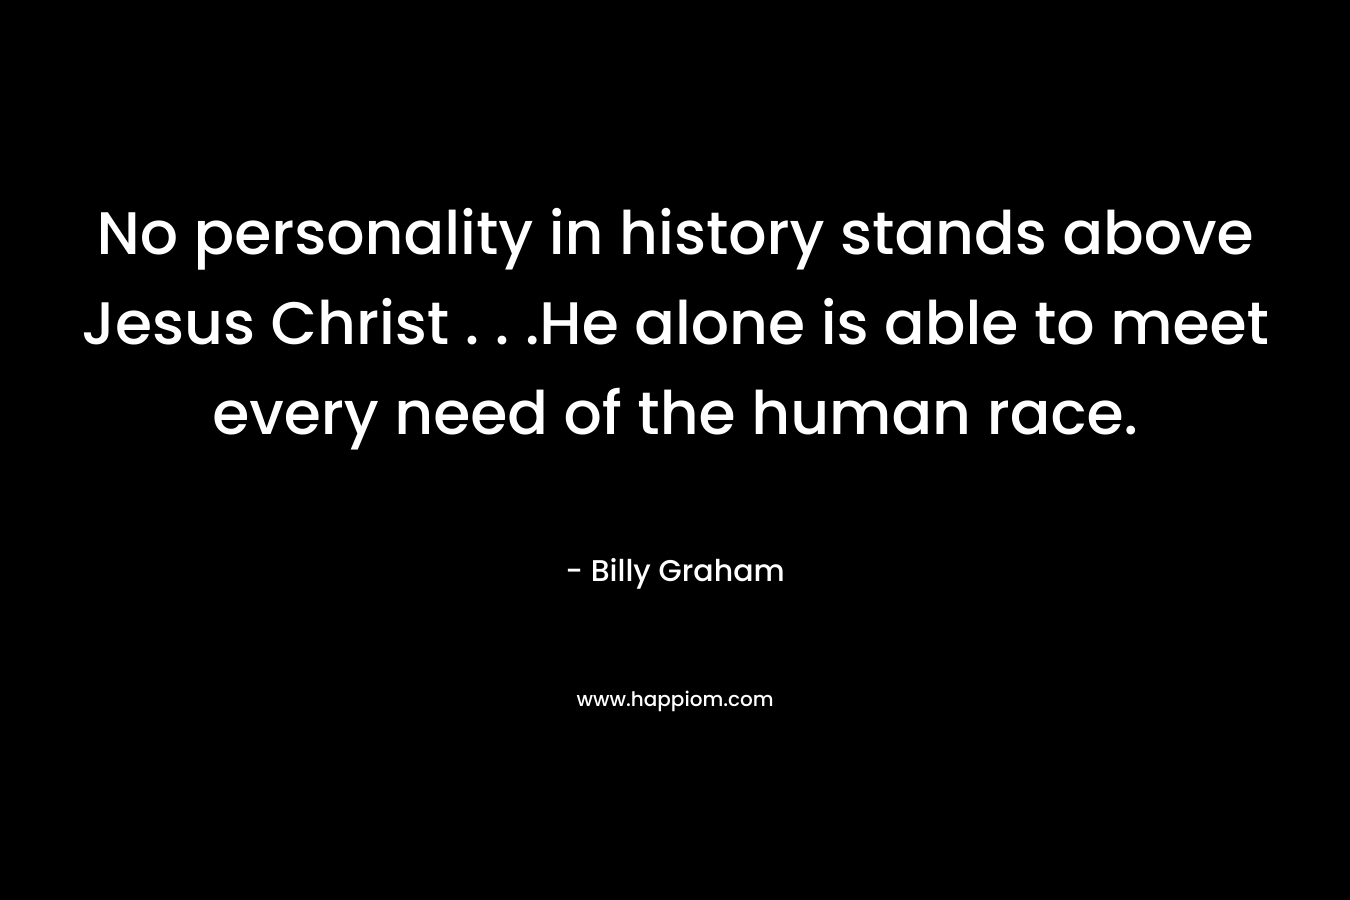 No personality in history stands above Jesus Christ . . .He alone is able to meet every need of the human race.